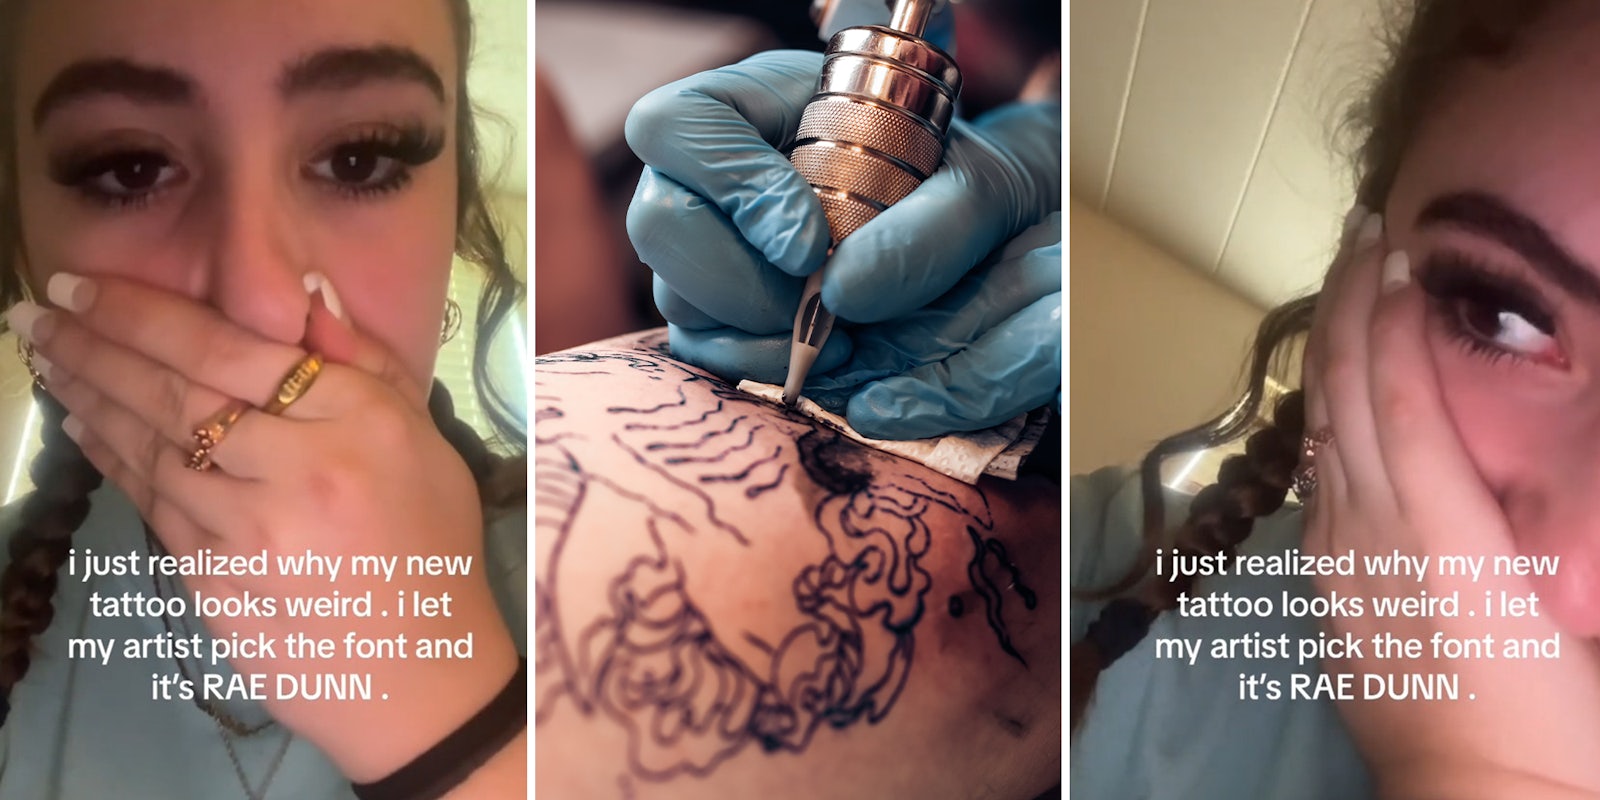 Woman gets tattoo and lets artist pick the font